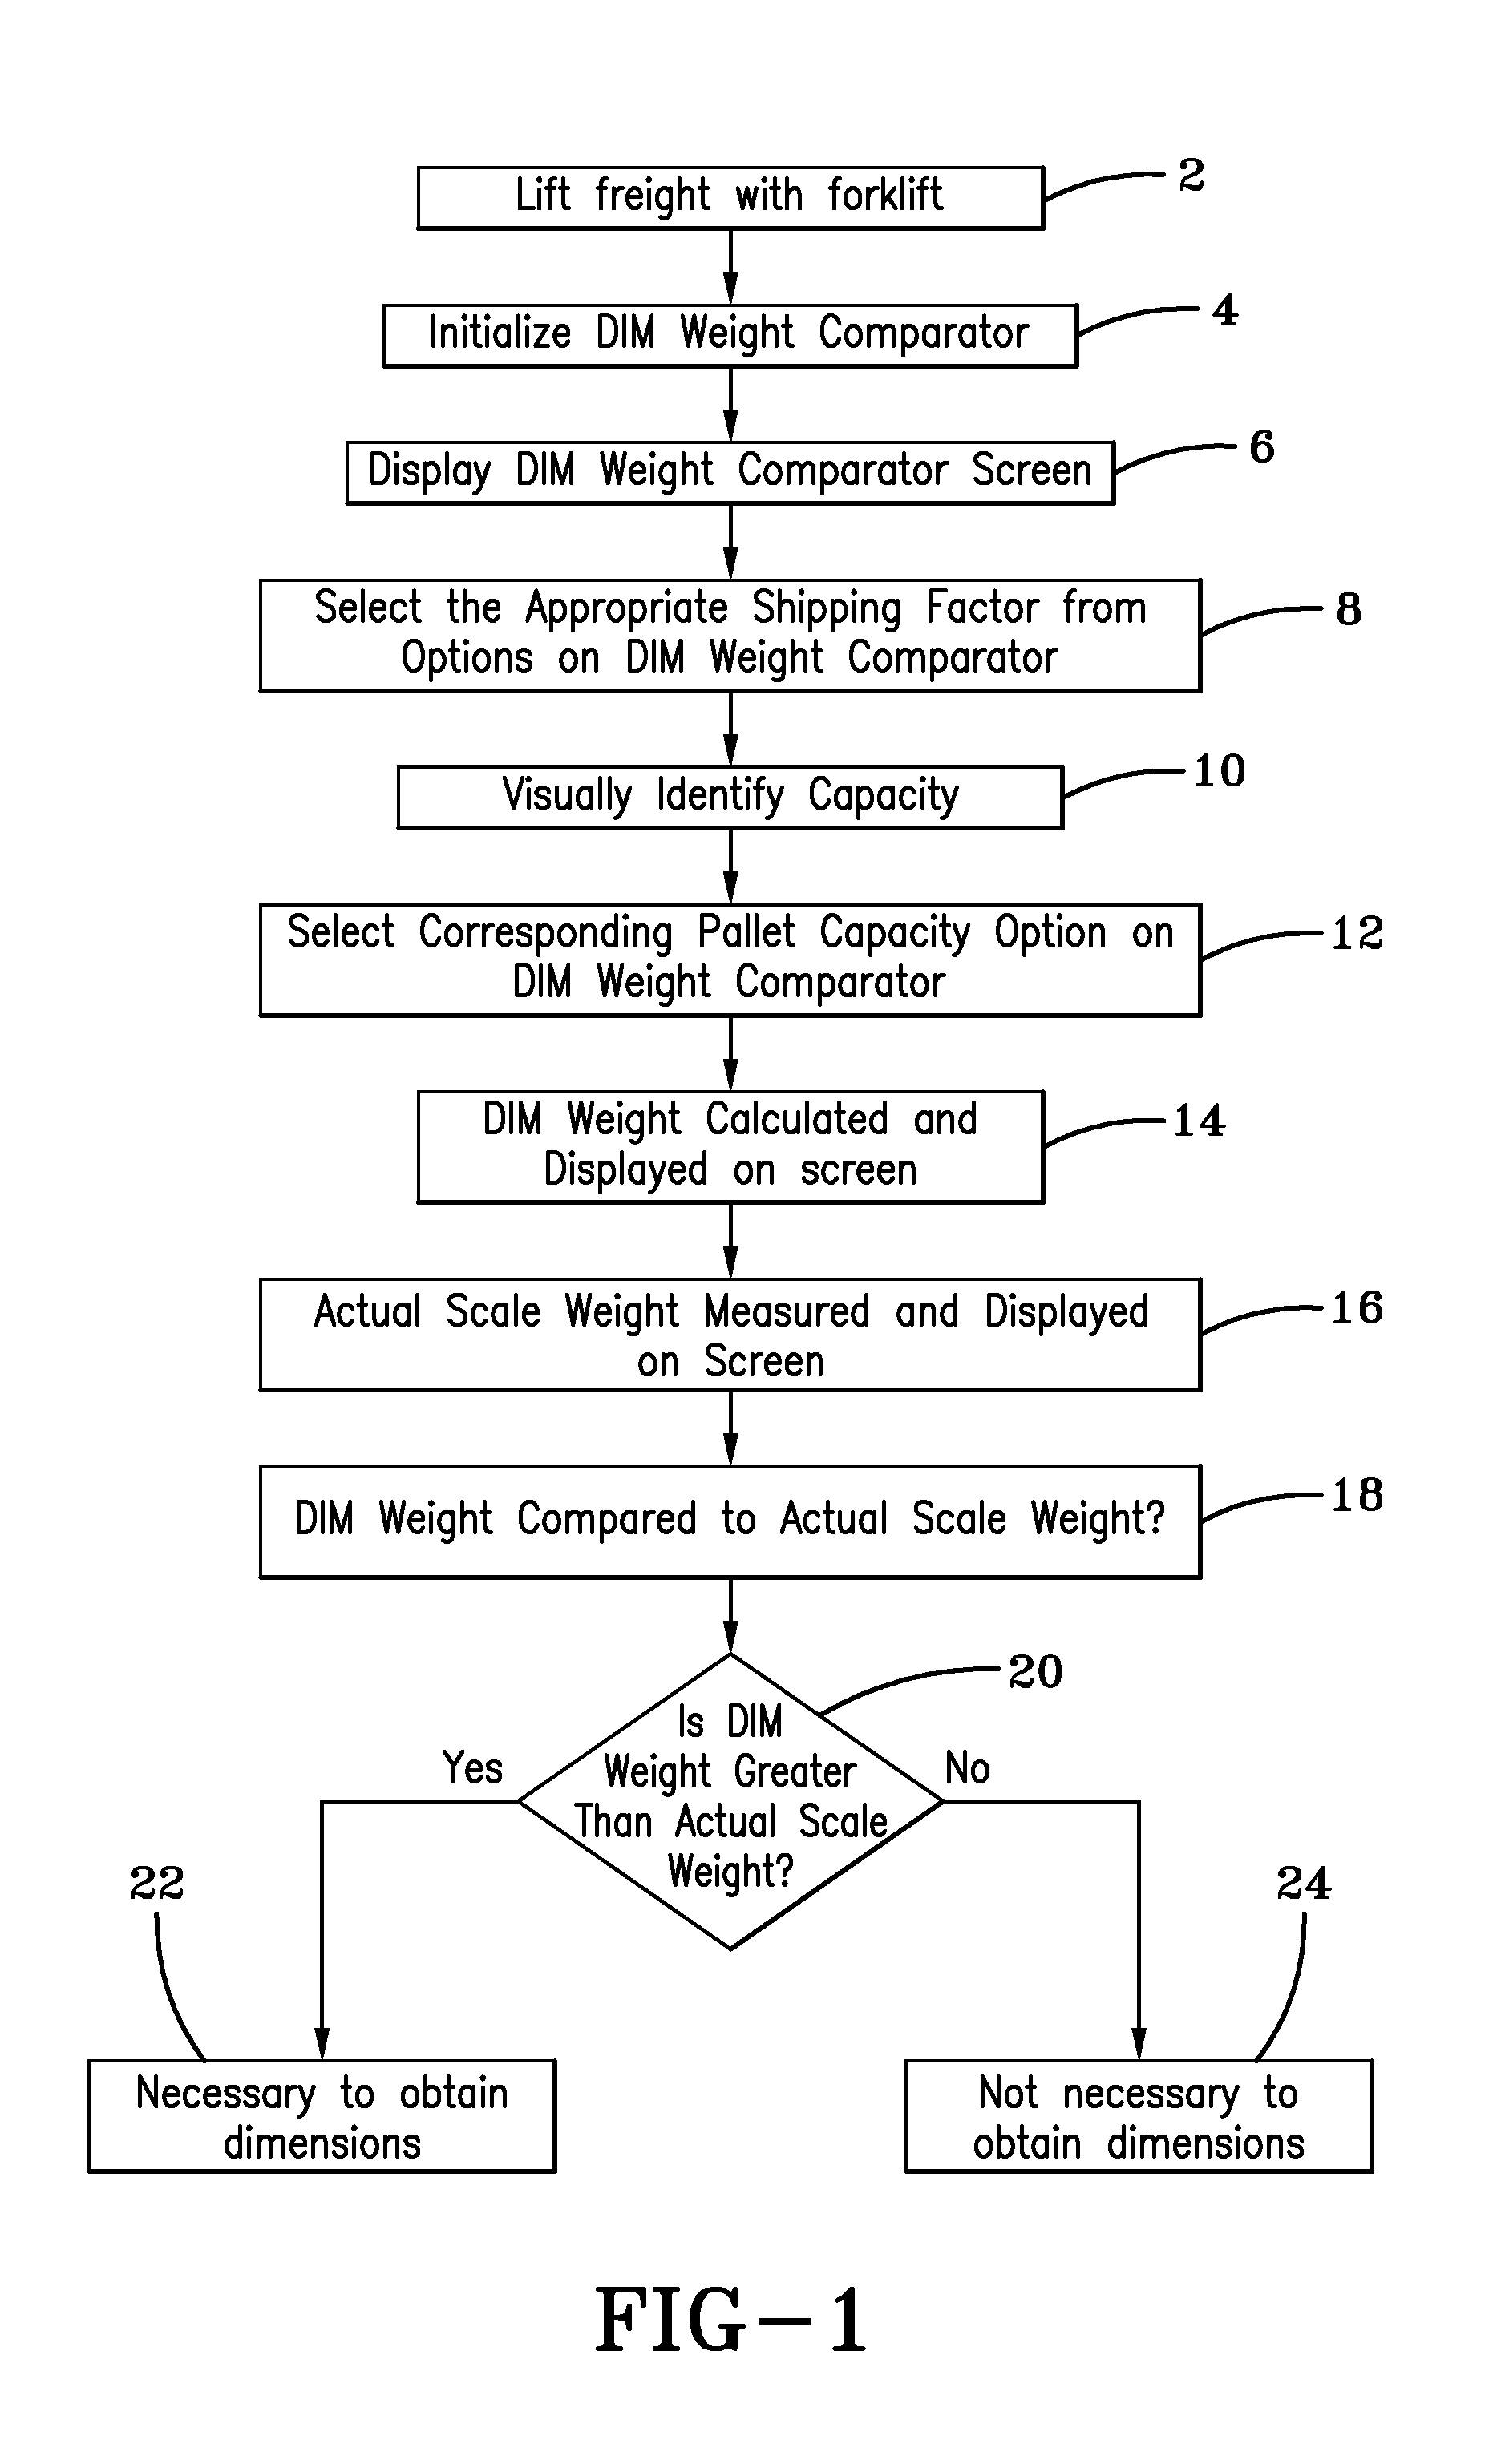 Method And System To Determine Need For Dimensional Weighing